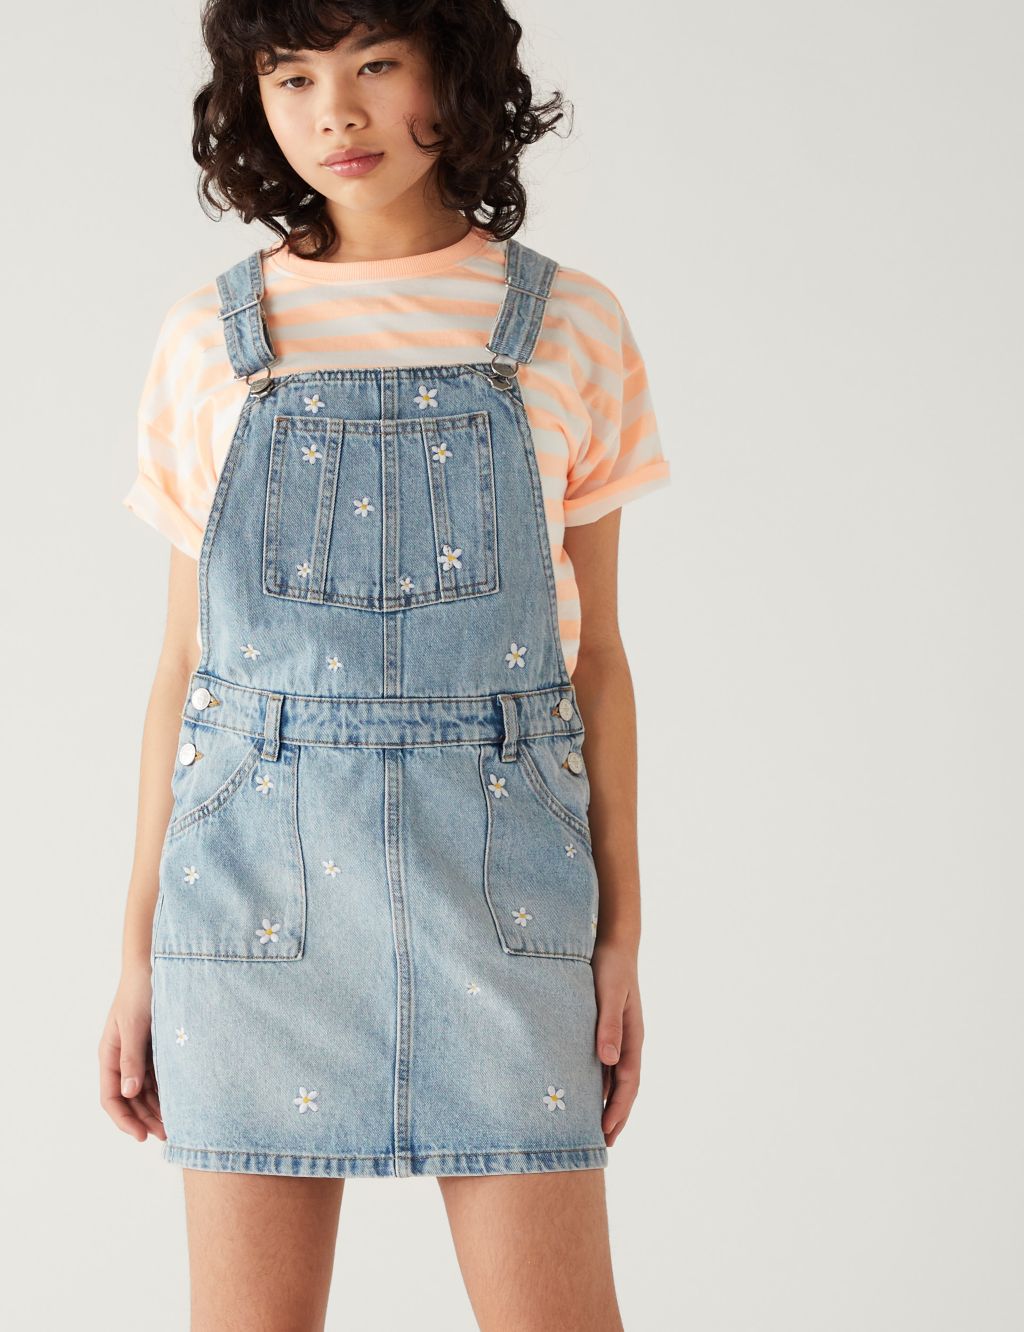 Denim Embroidered Daisy Pinafore (6-16 Yrs) image 2